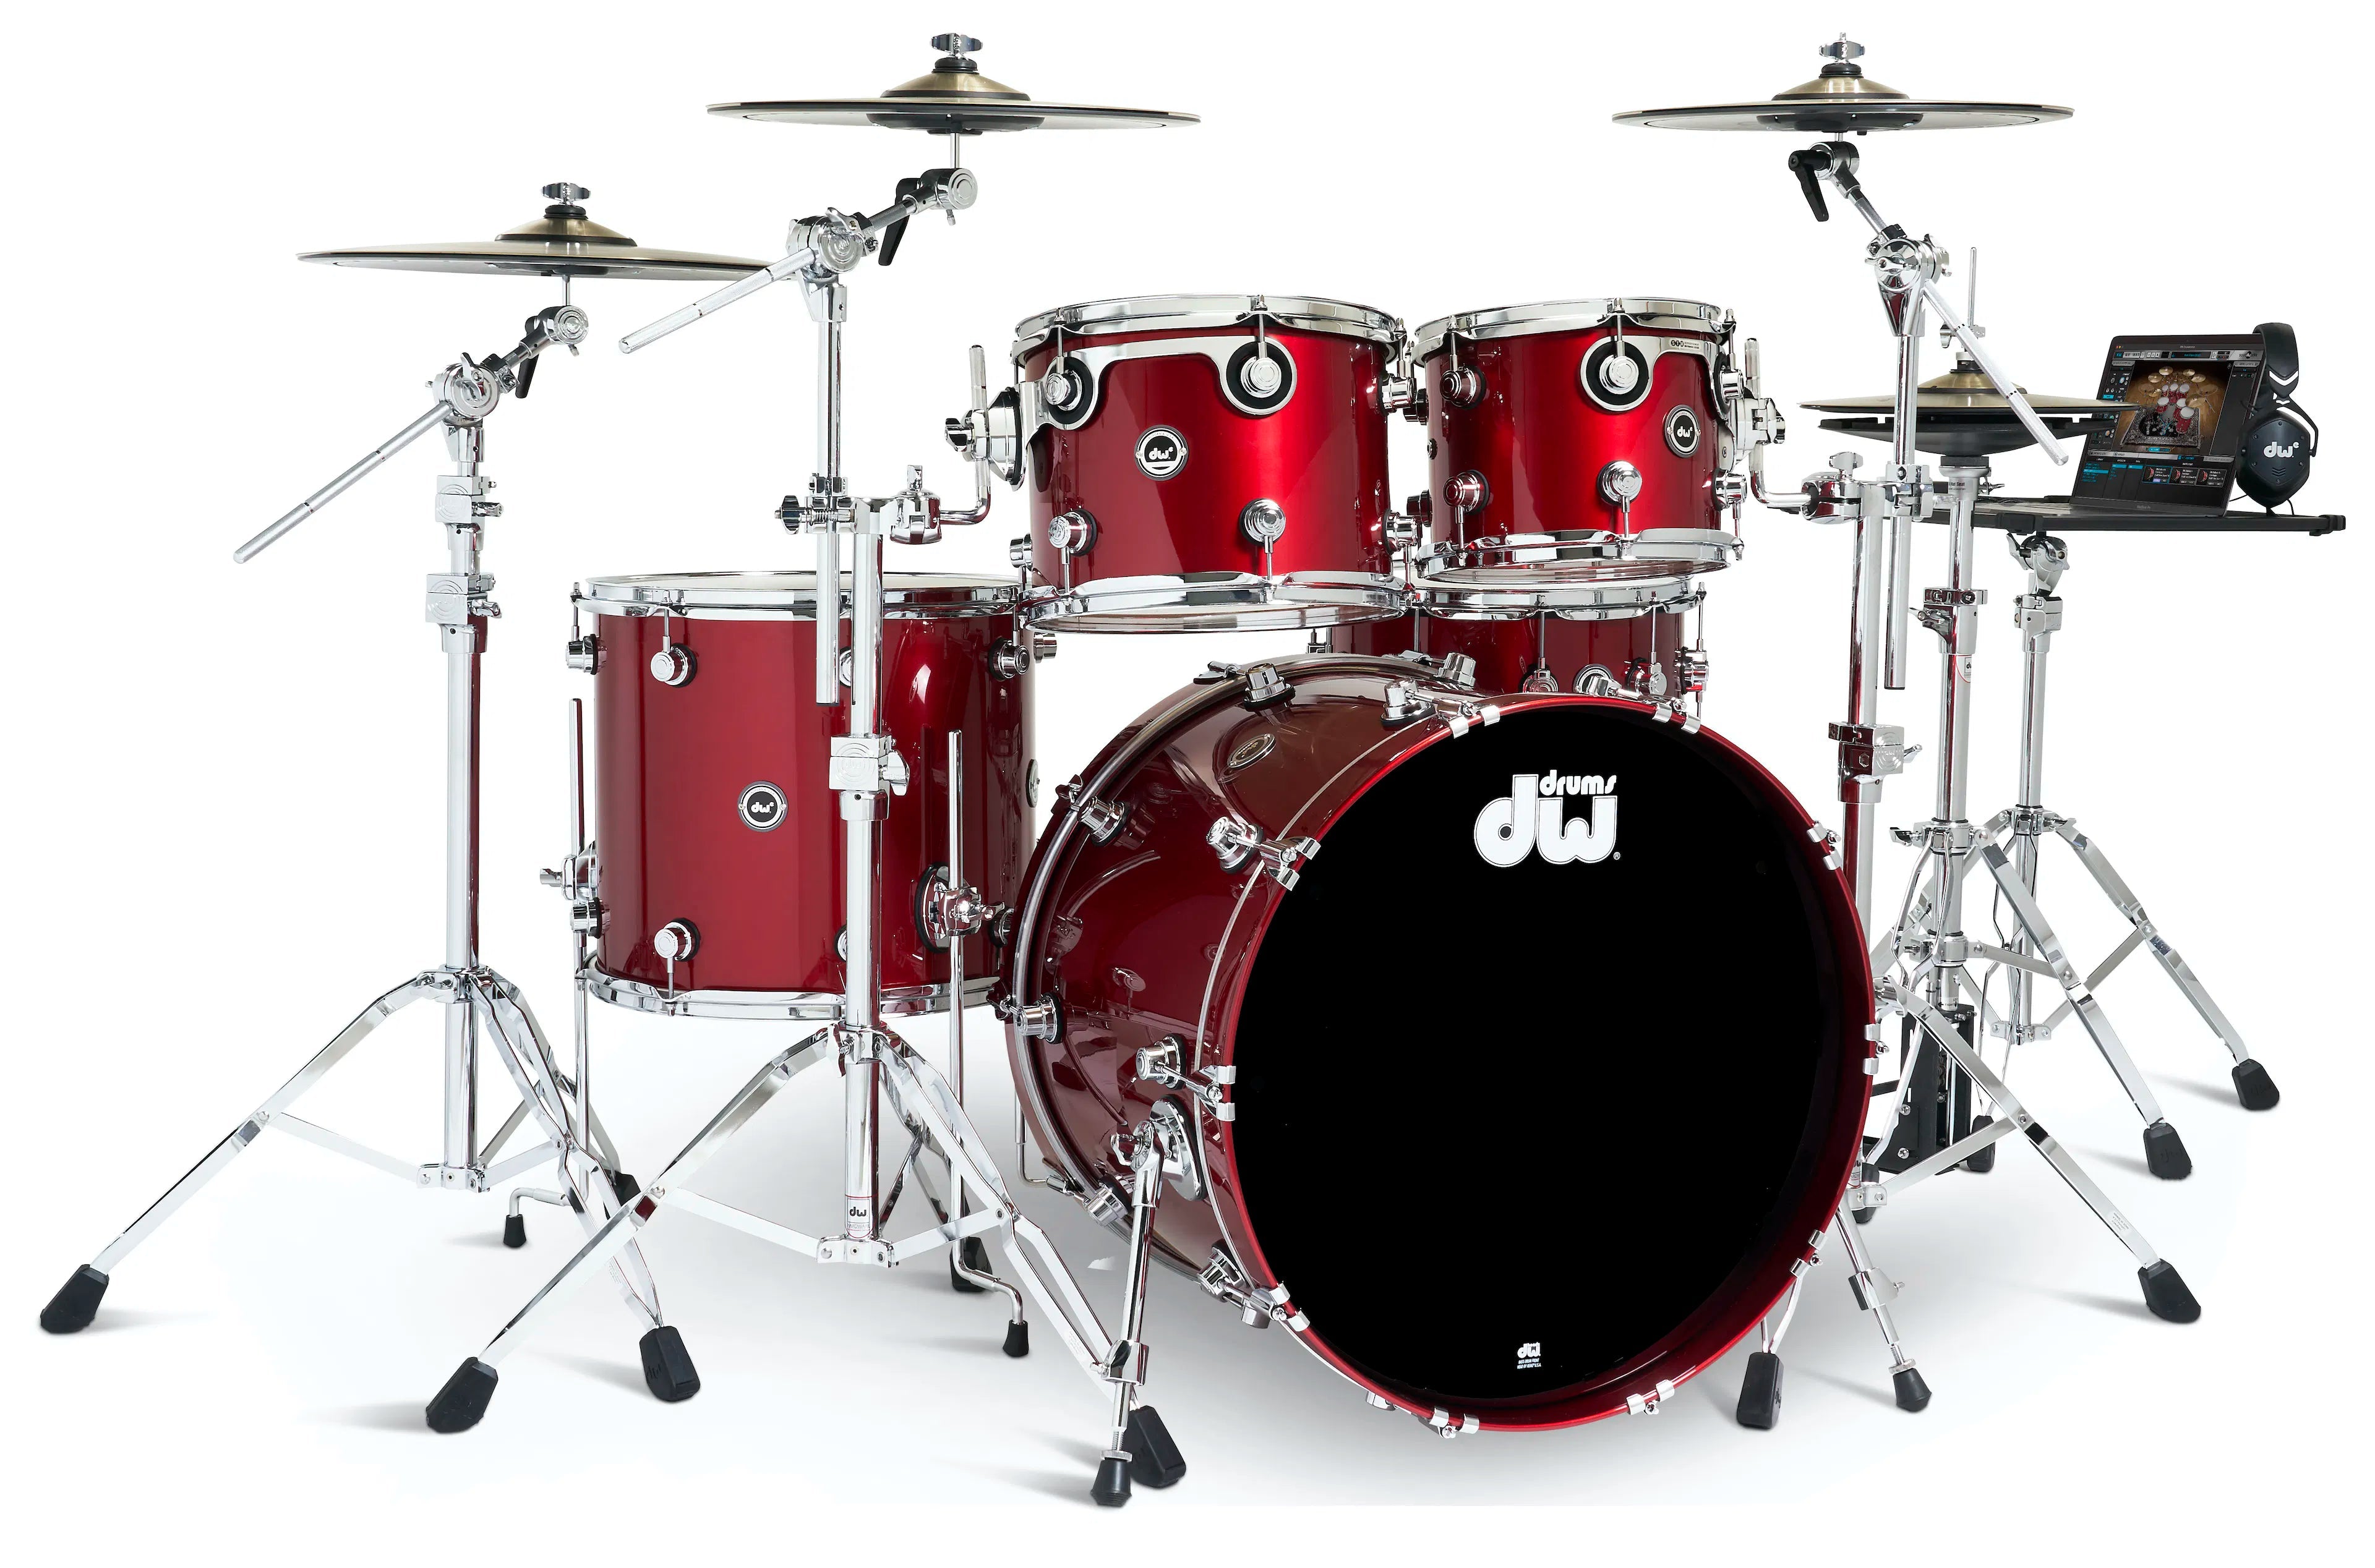 DWe Drums Electronic 5-Piece Drum Set with Cymbals in Black Cherry Metallic Electronic Drums DW 